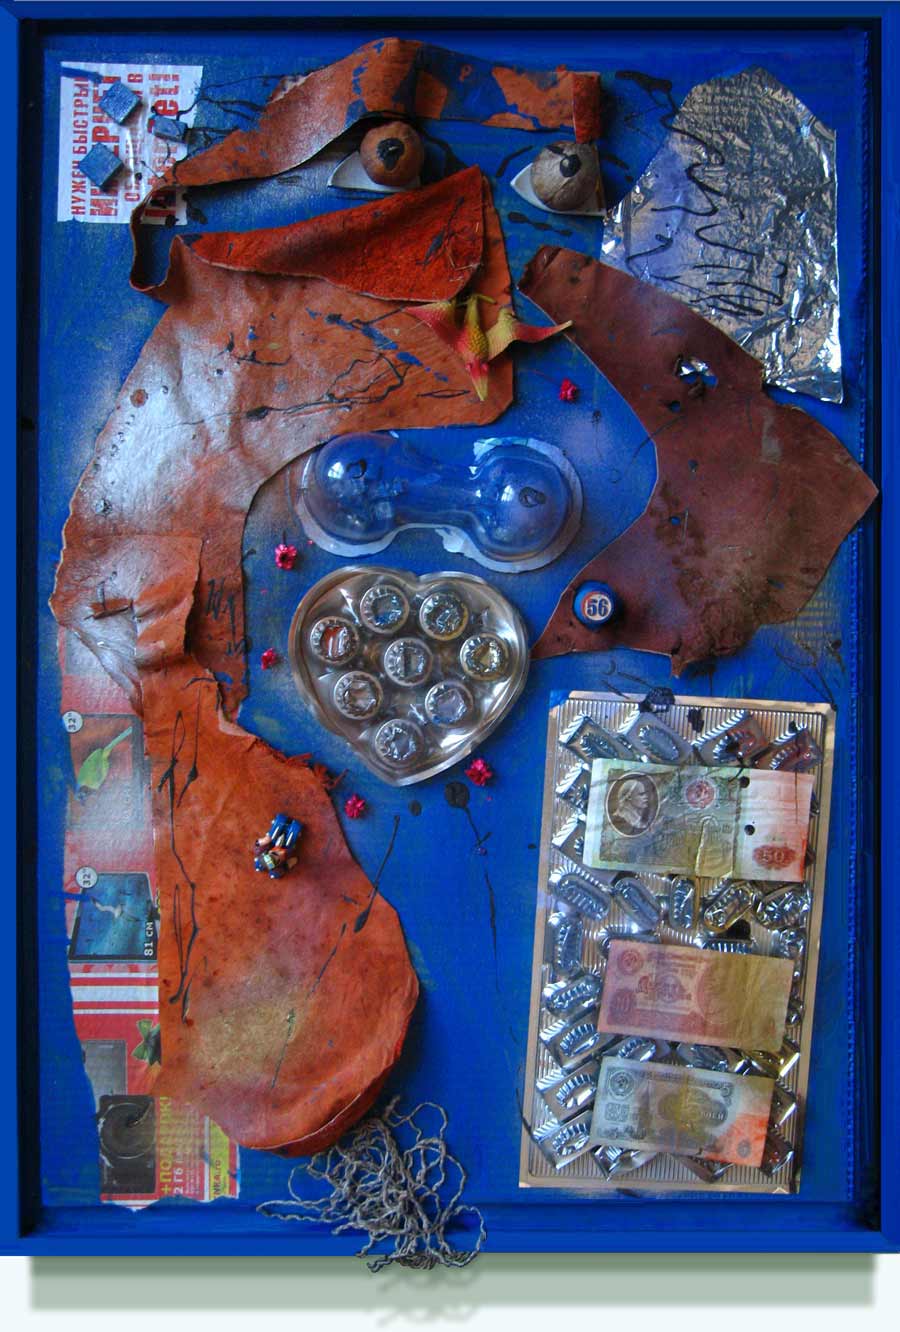 Felix Volosenkov (b. 1944 in Ukraine, now lives and works in St. Petersburg). Venus of the Moment or the Moment of Venus. 2008. Mixed media on pasteboard. 80×60 cm.